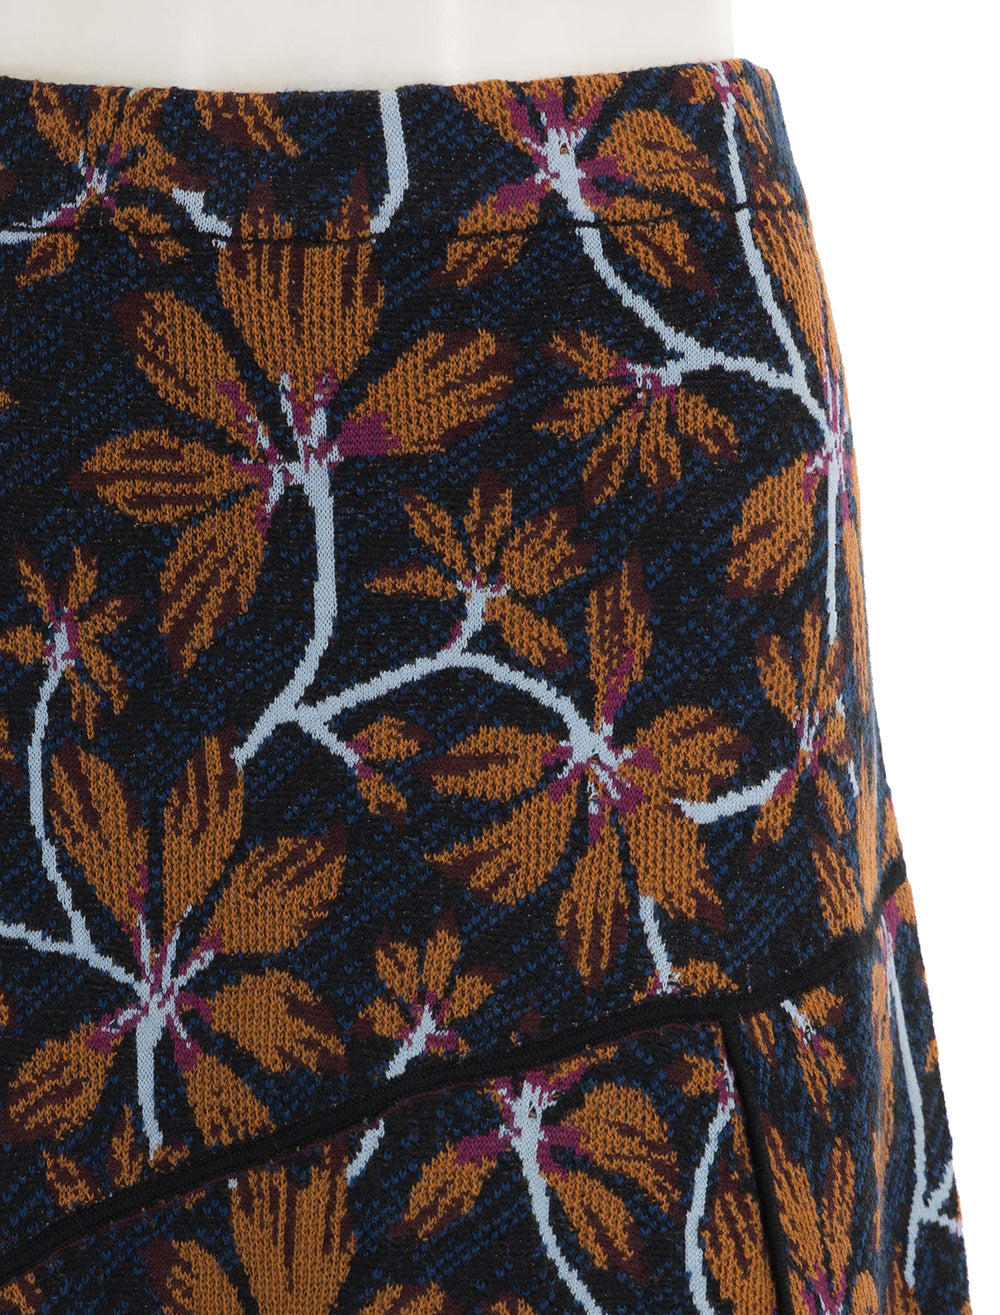 Close-up view of Ulla Johnson's sabra skirt in moonflower.